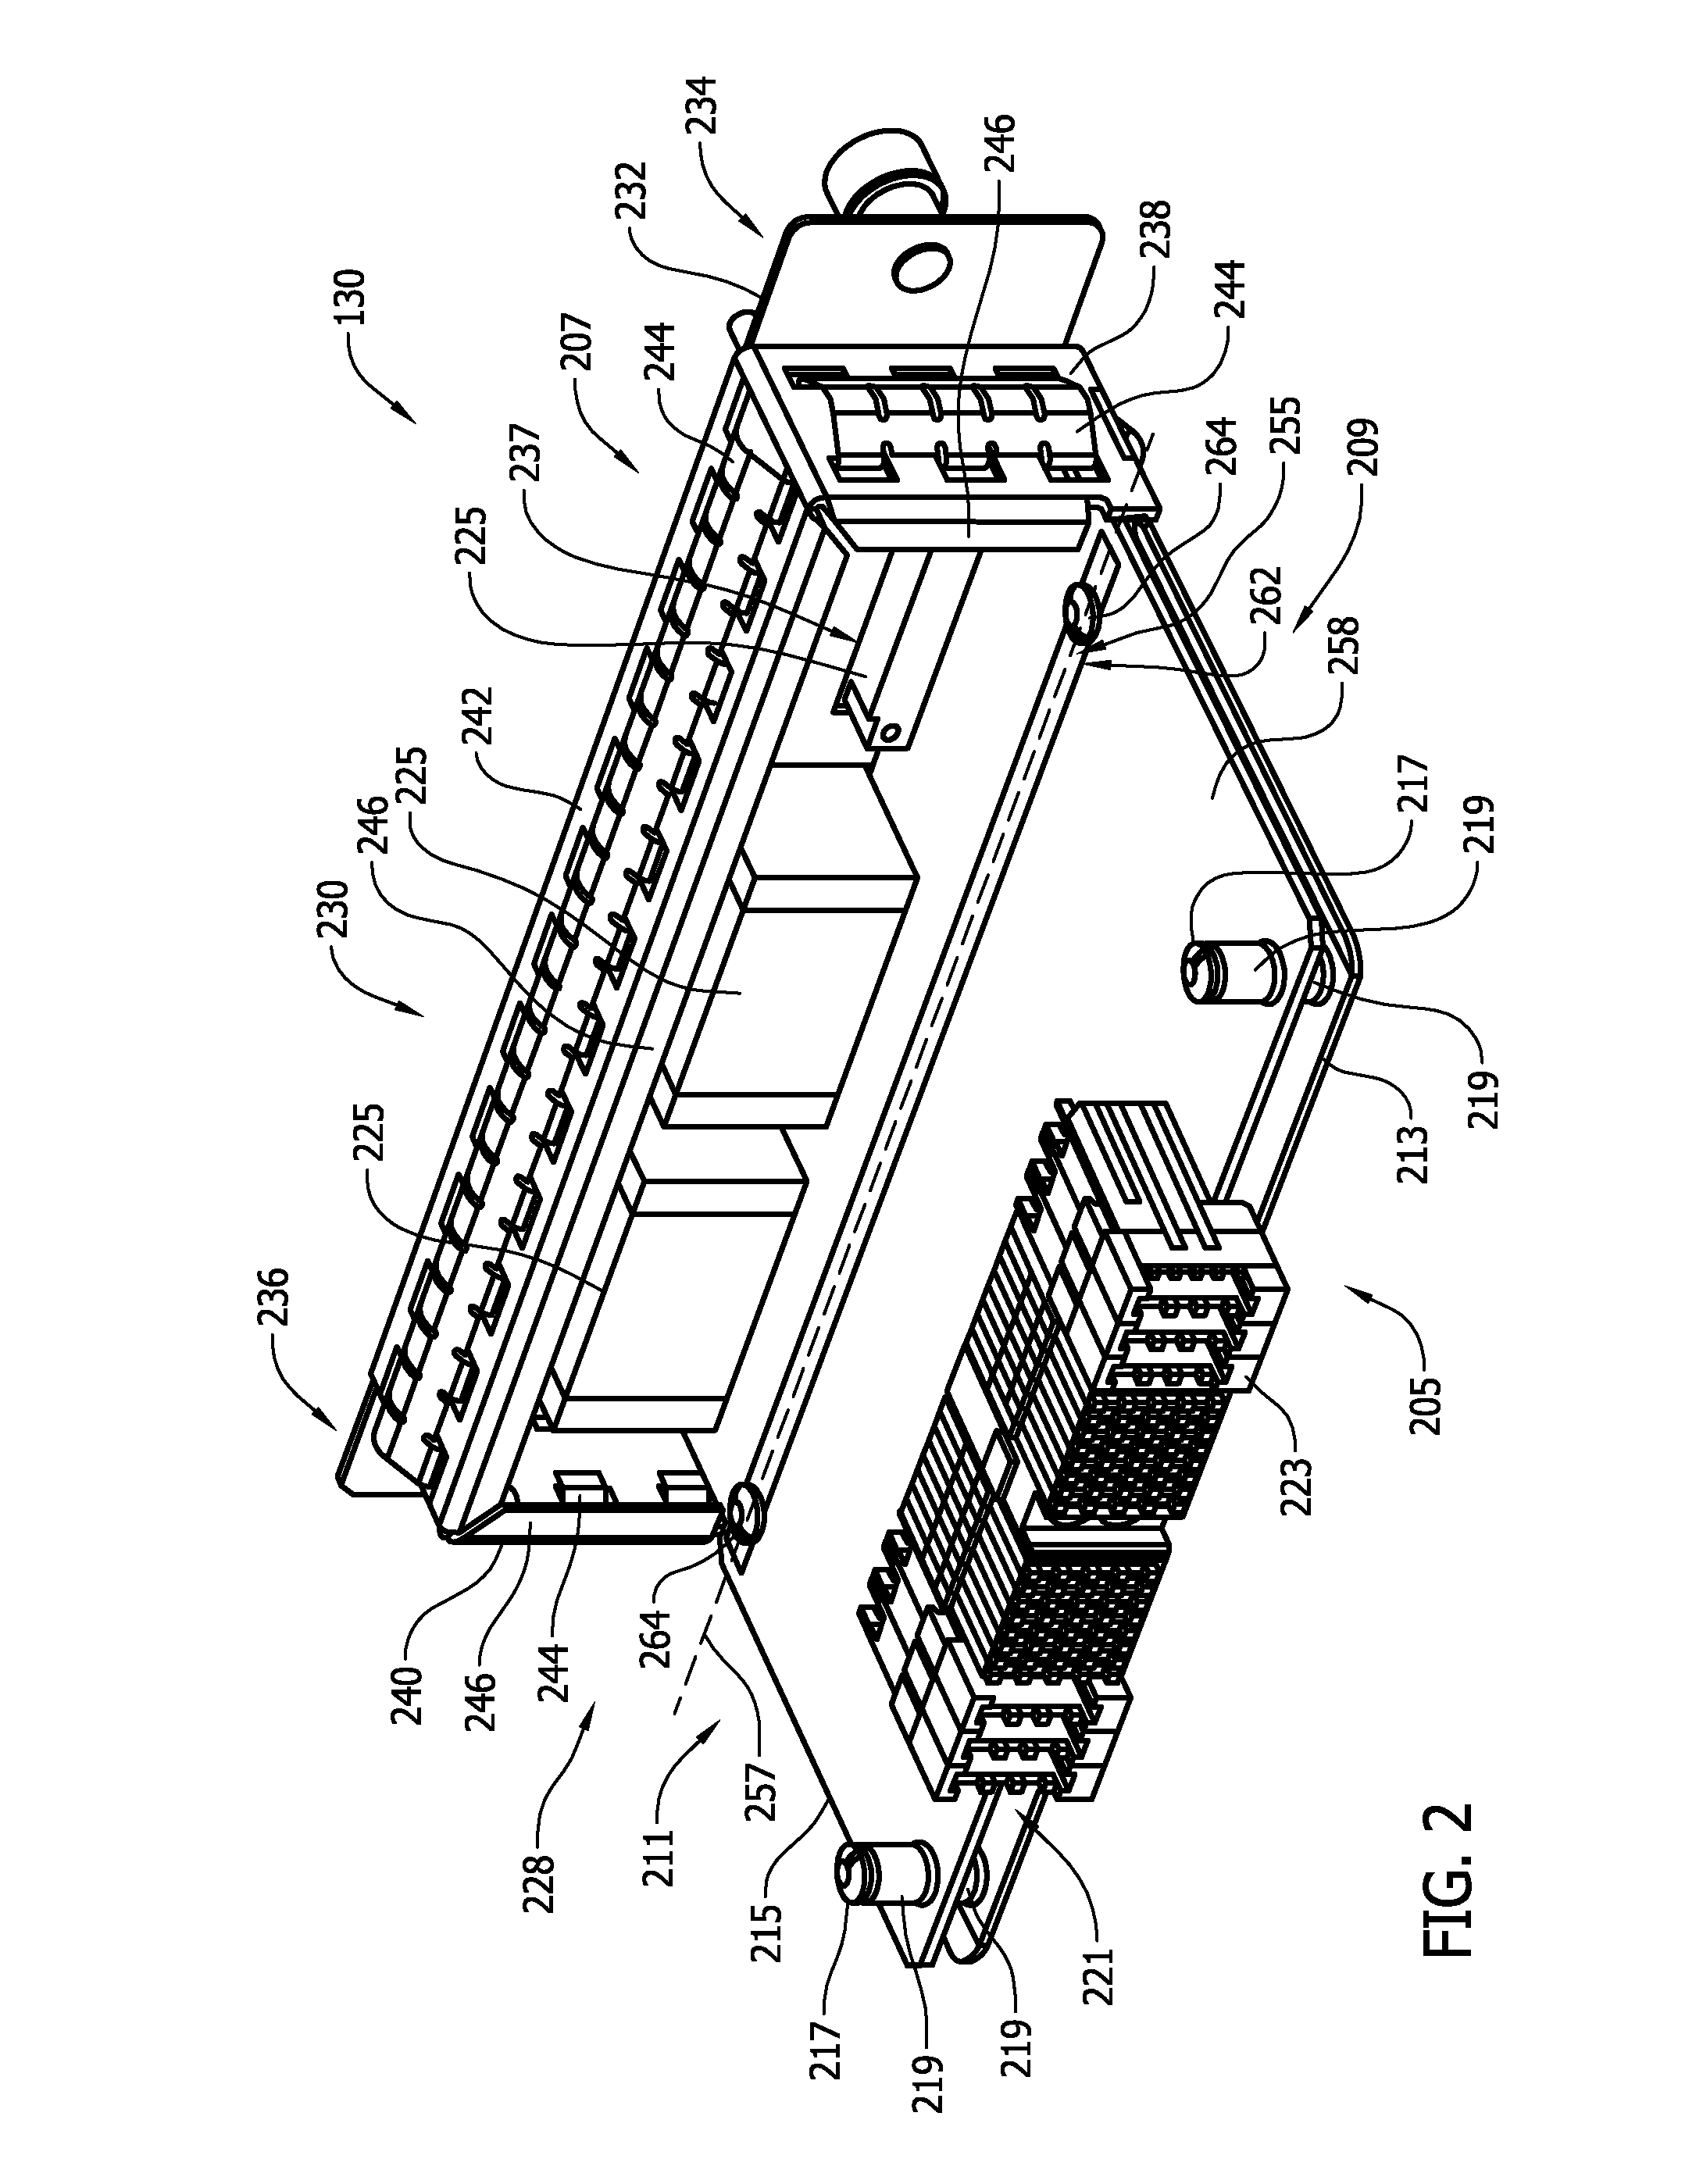 Module for use with a monitoring system and method of assembling same